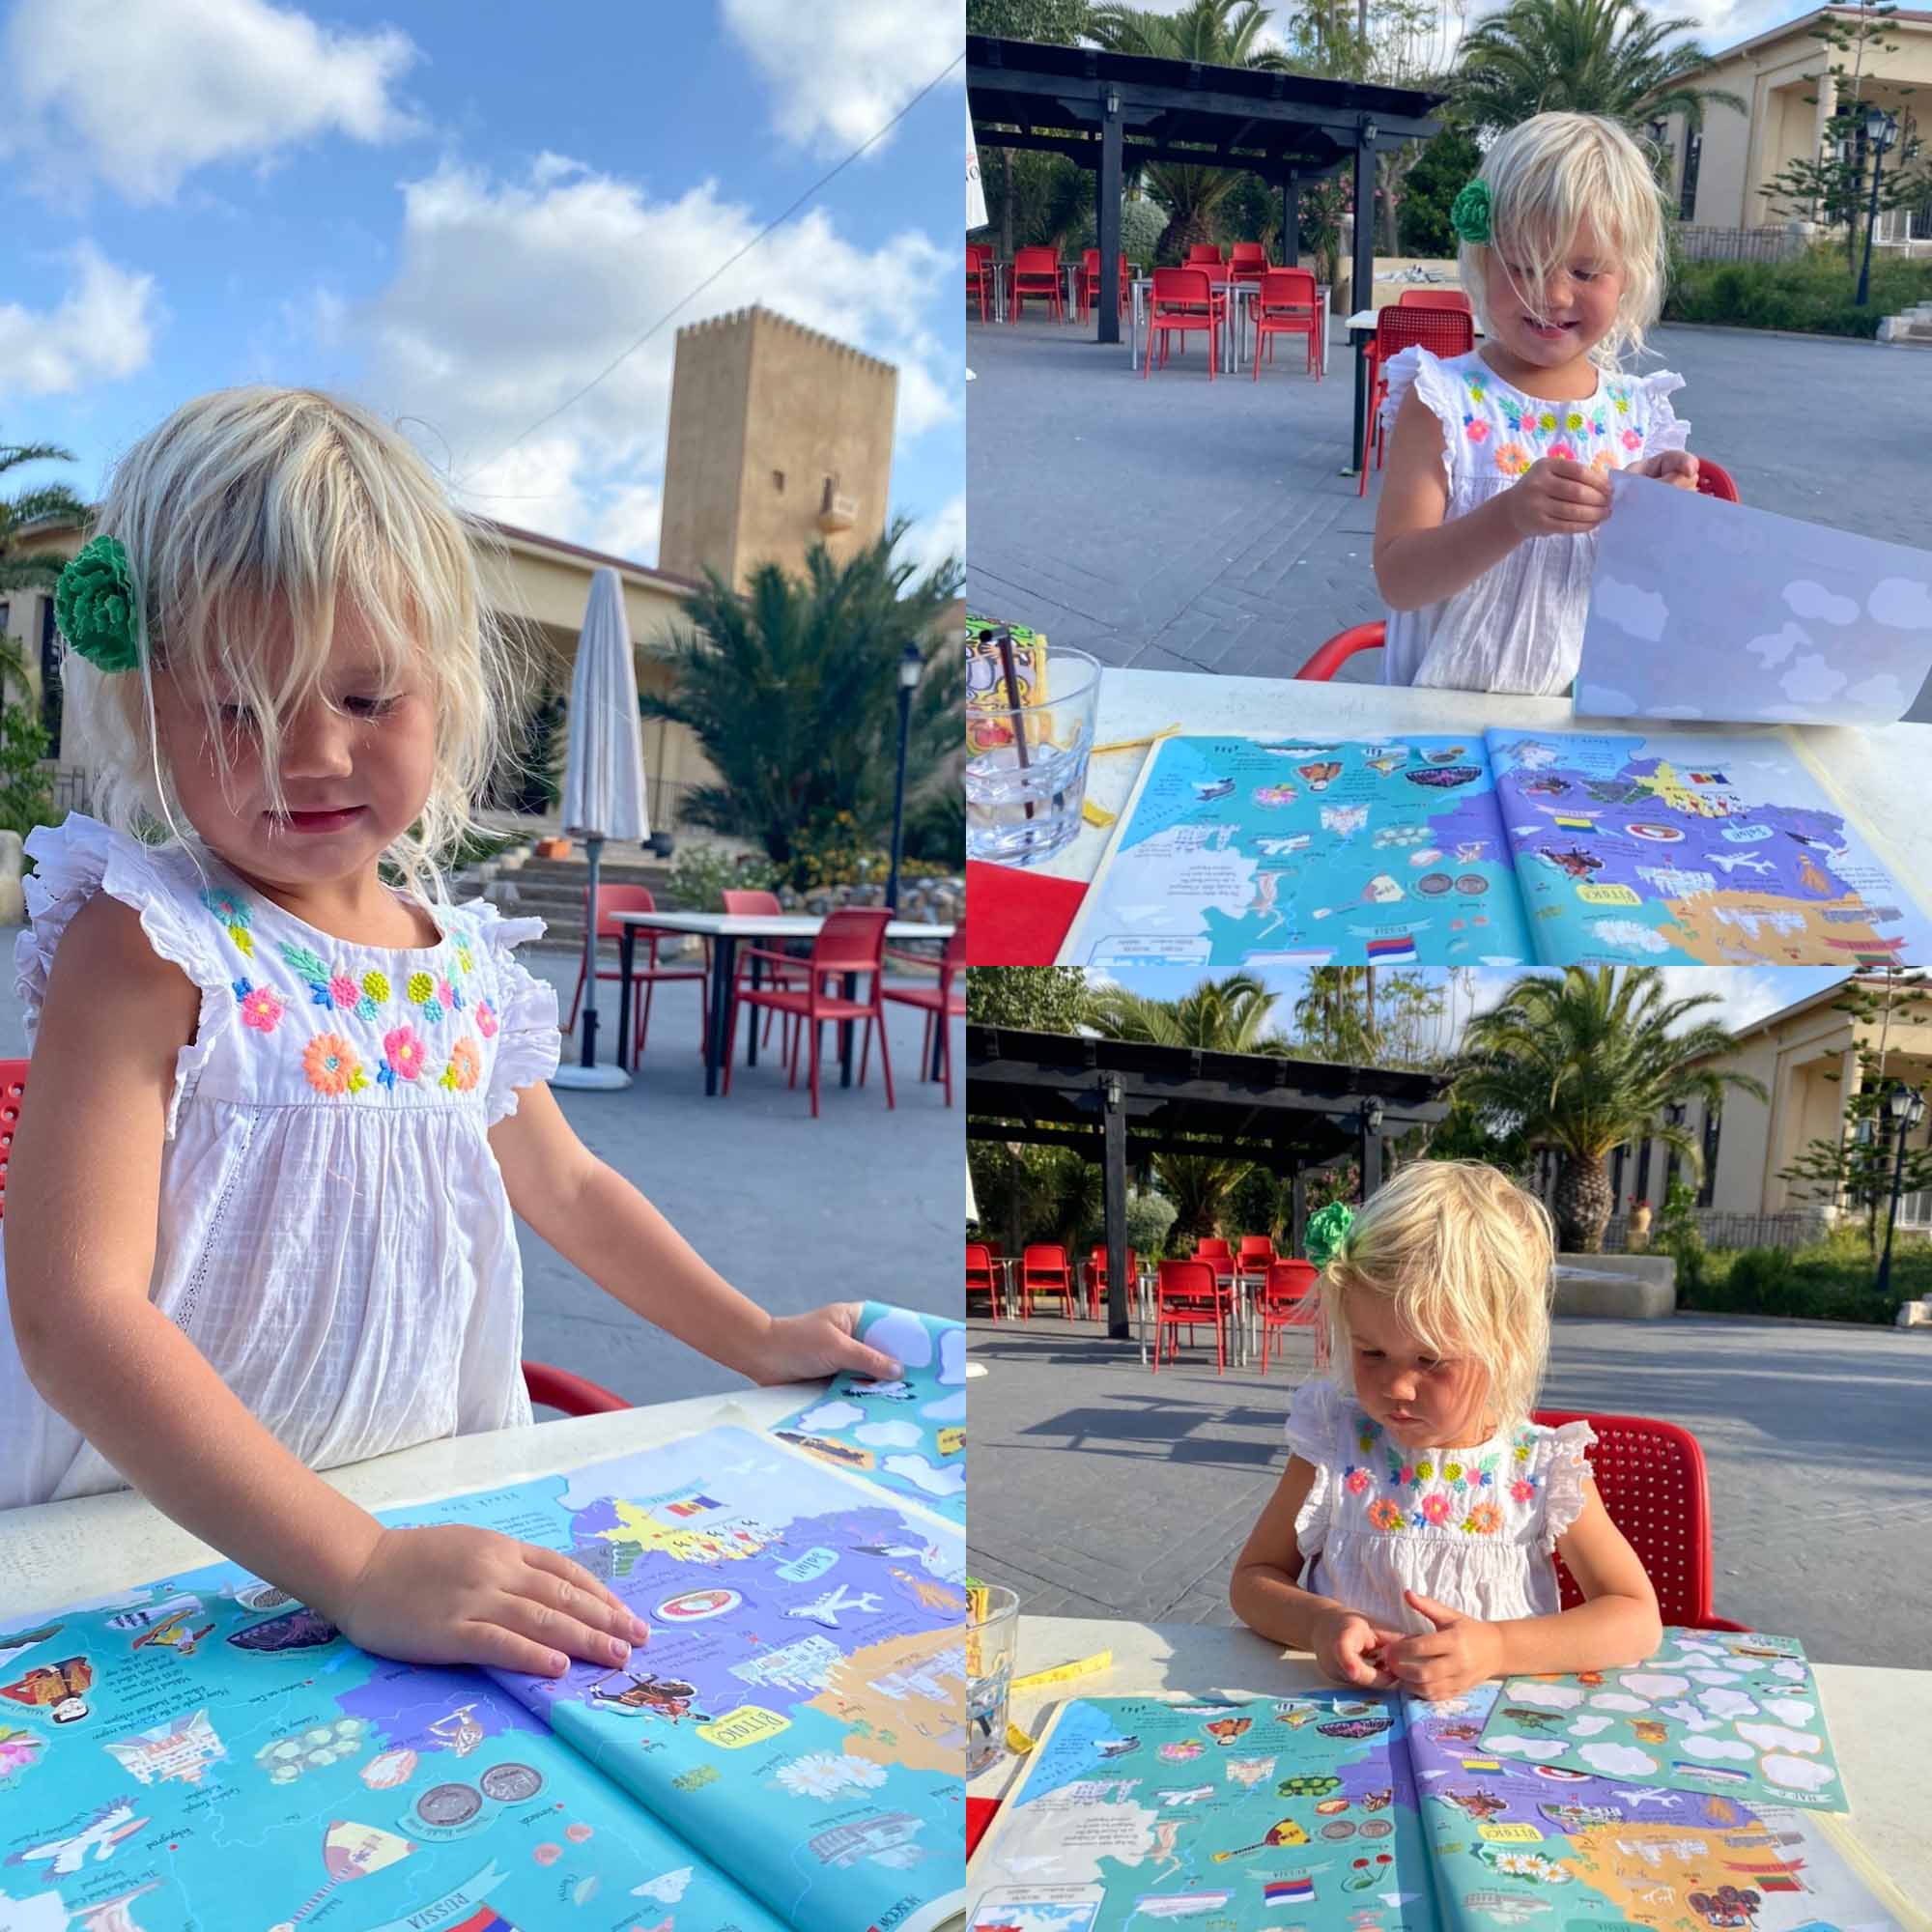 collage of images of a young girl sat at a restaurant table sticking stickers into a travel-themed sticker book